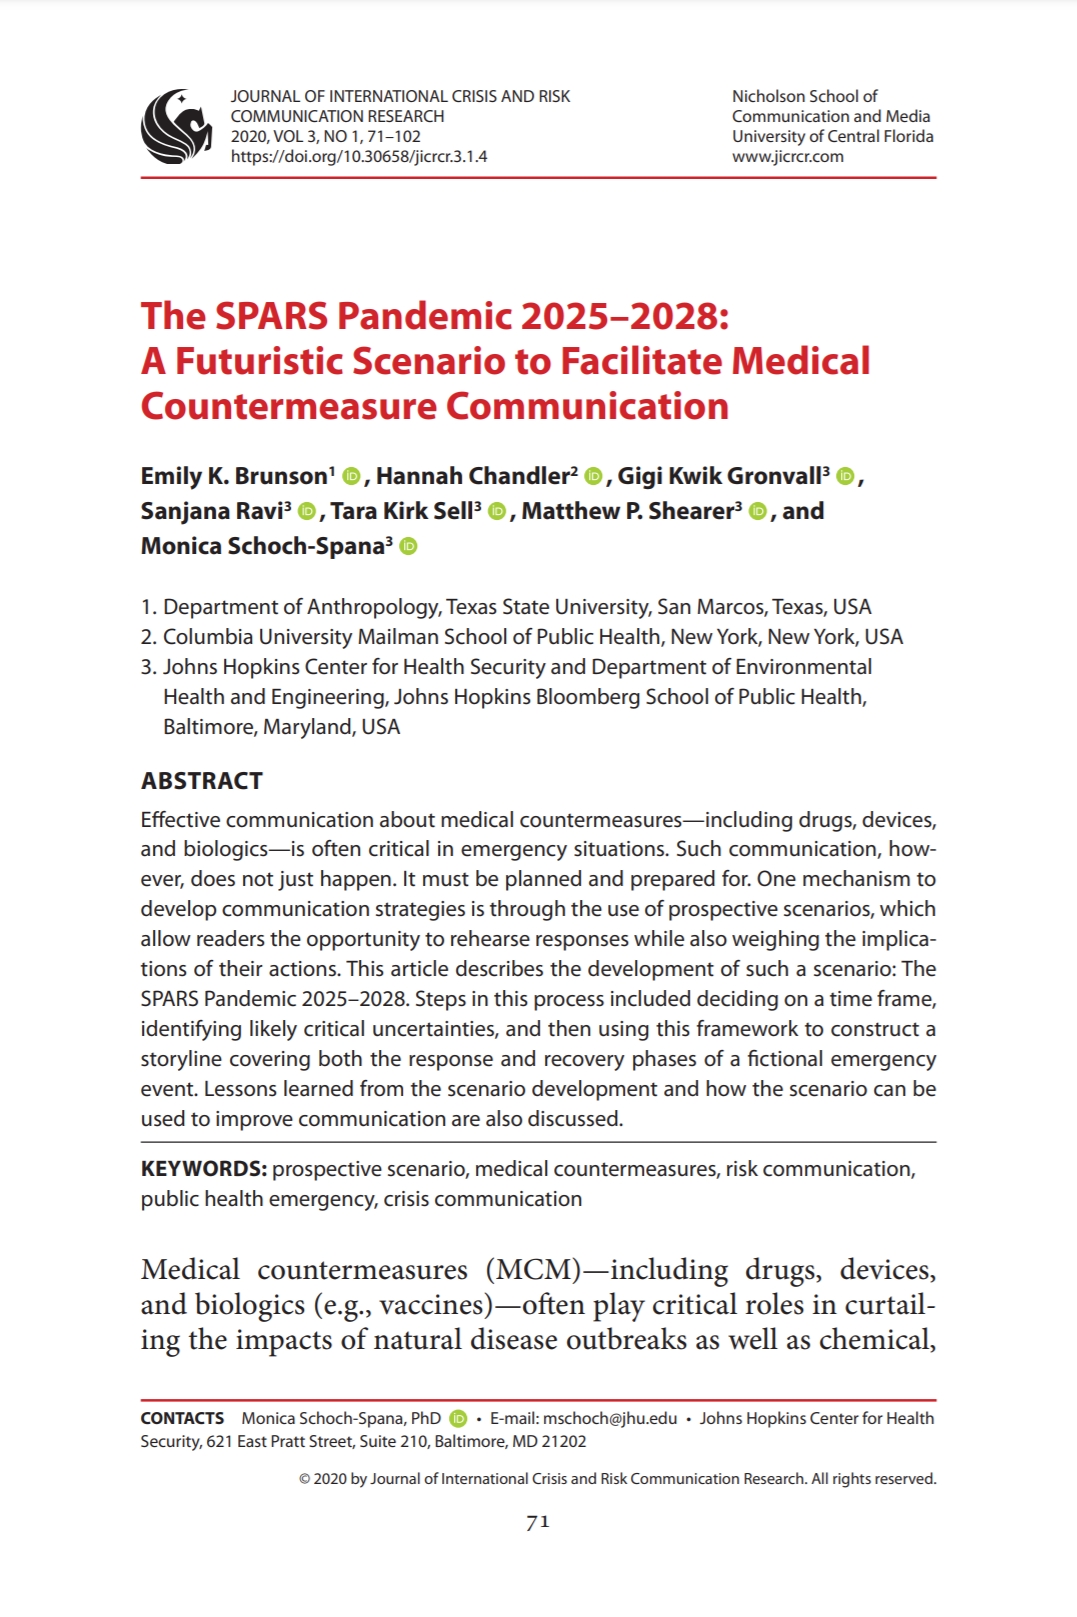 an article from The Journal Of International Crisis And Risk Communication Research : The Spars Pandemic 2025–2028 [ A Futuristic Scenario To Facilitate Medical Countermeasure Communication ]